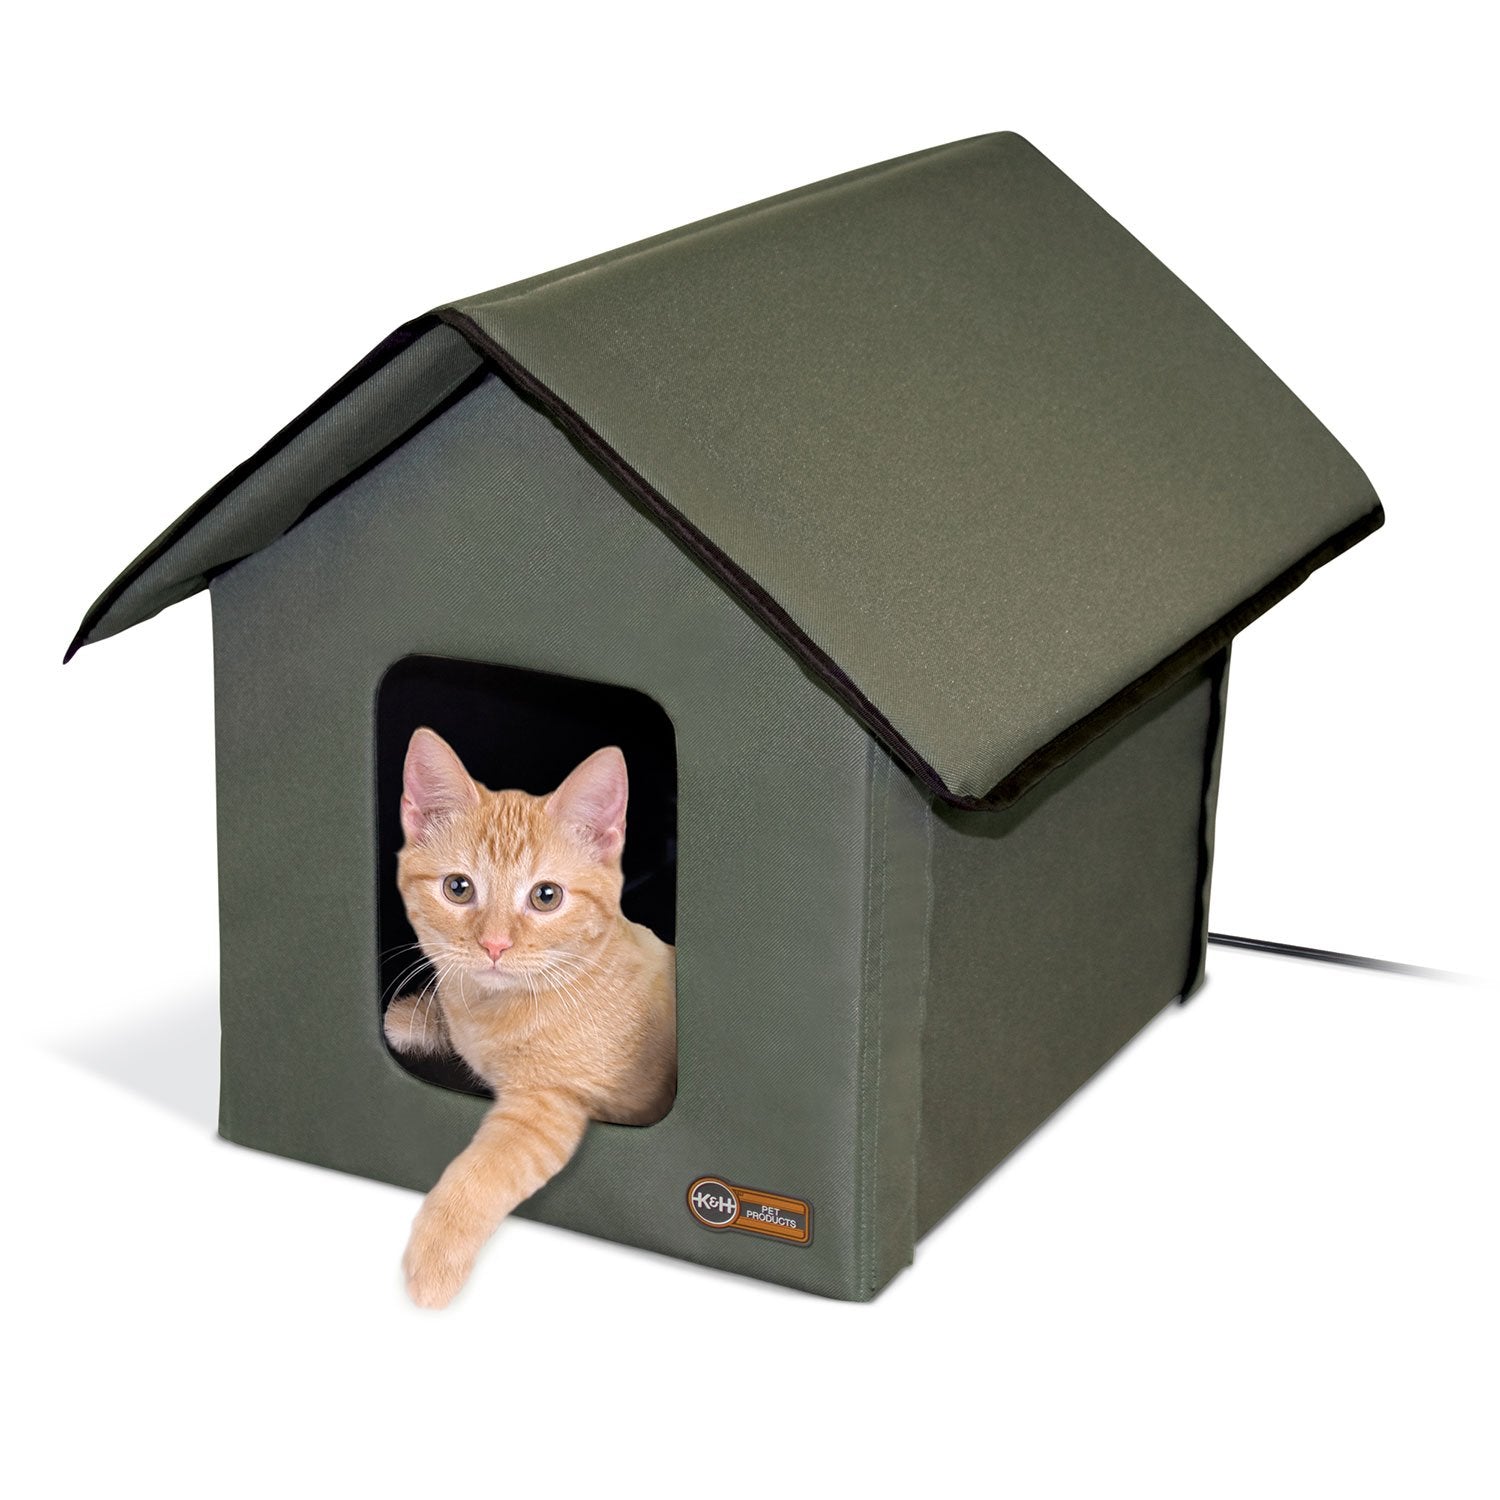 K&h Pet Products Kh3993 Outdoor Heated Kitty House